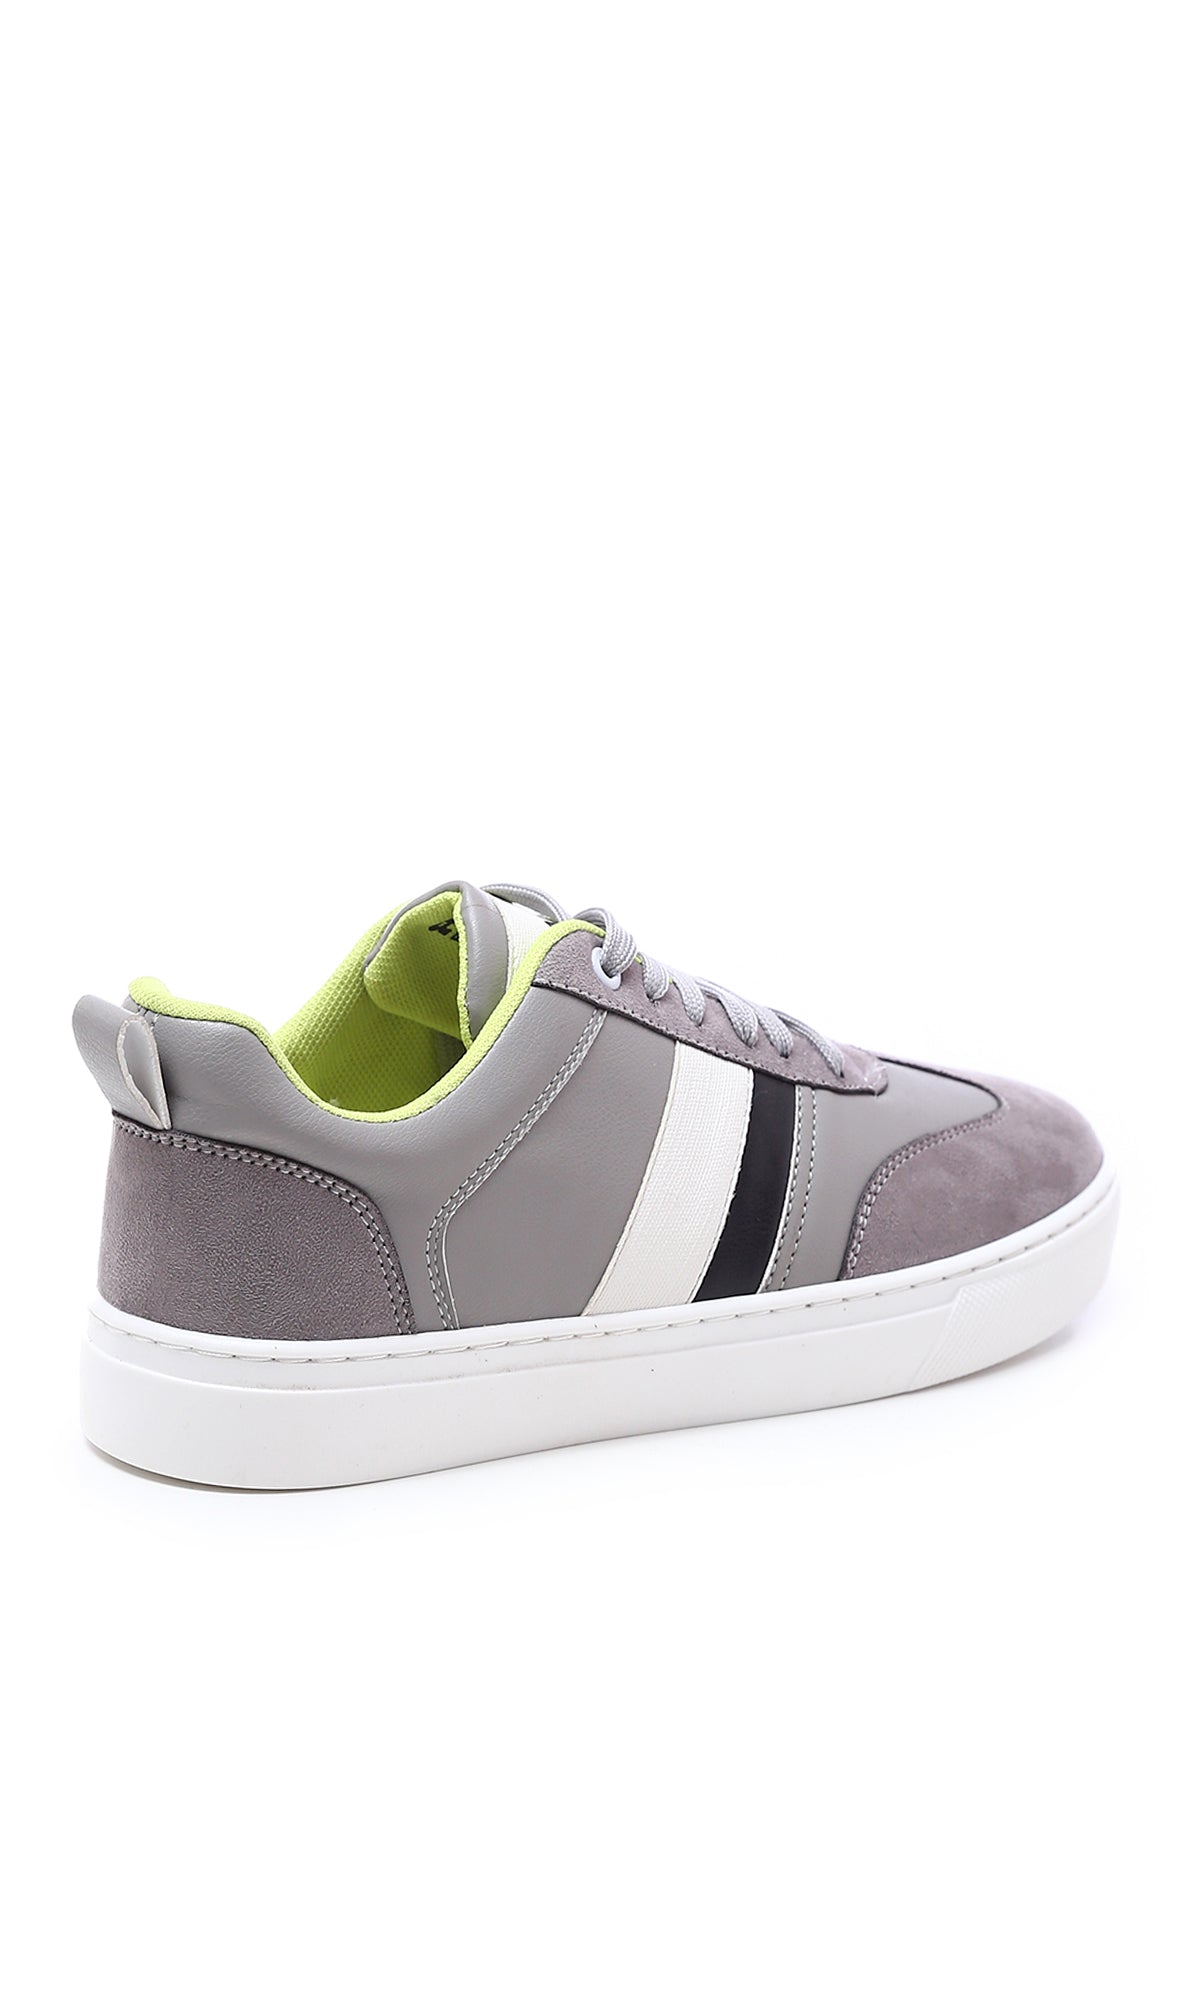 O176722 Round Toecap Lace Up Casual Shoes - Dark Grey